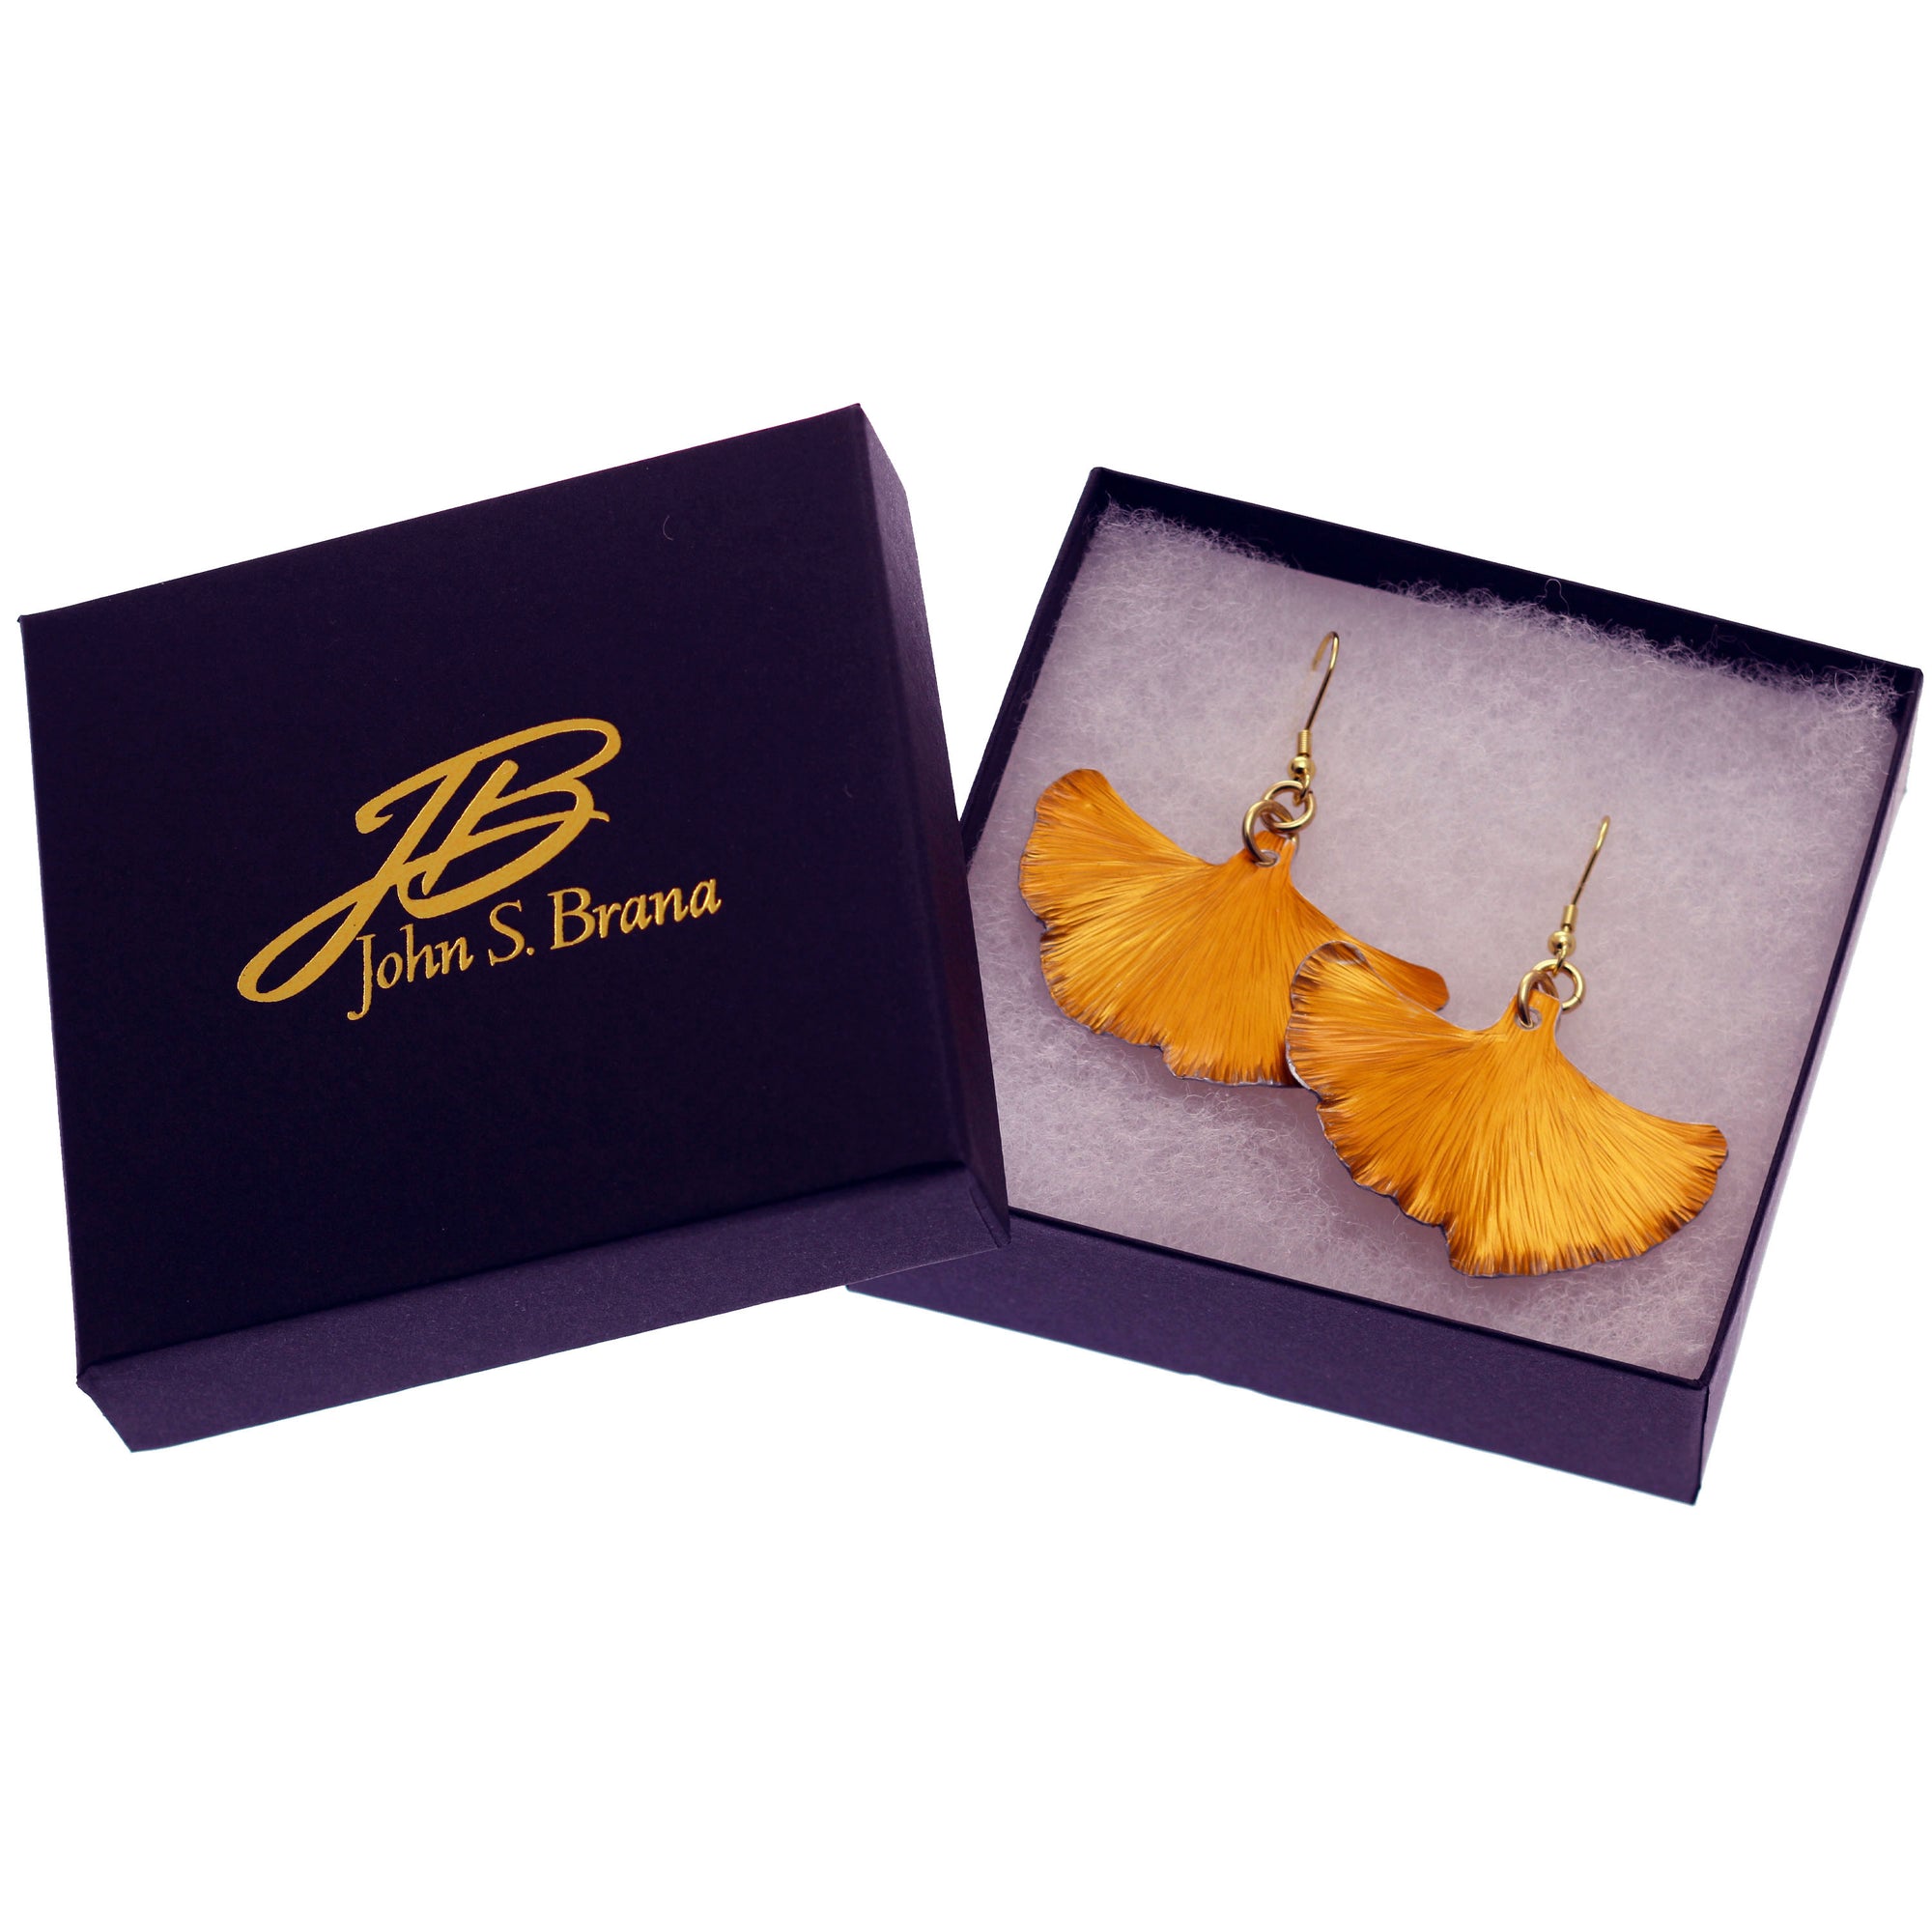 Orange ginkgo leaf earrings in a gift box: a vibrant accessory inspired by nature's beauty. Perfect for any occasion.